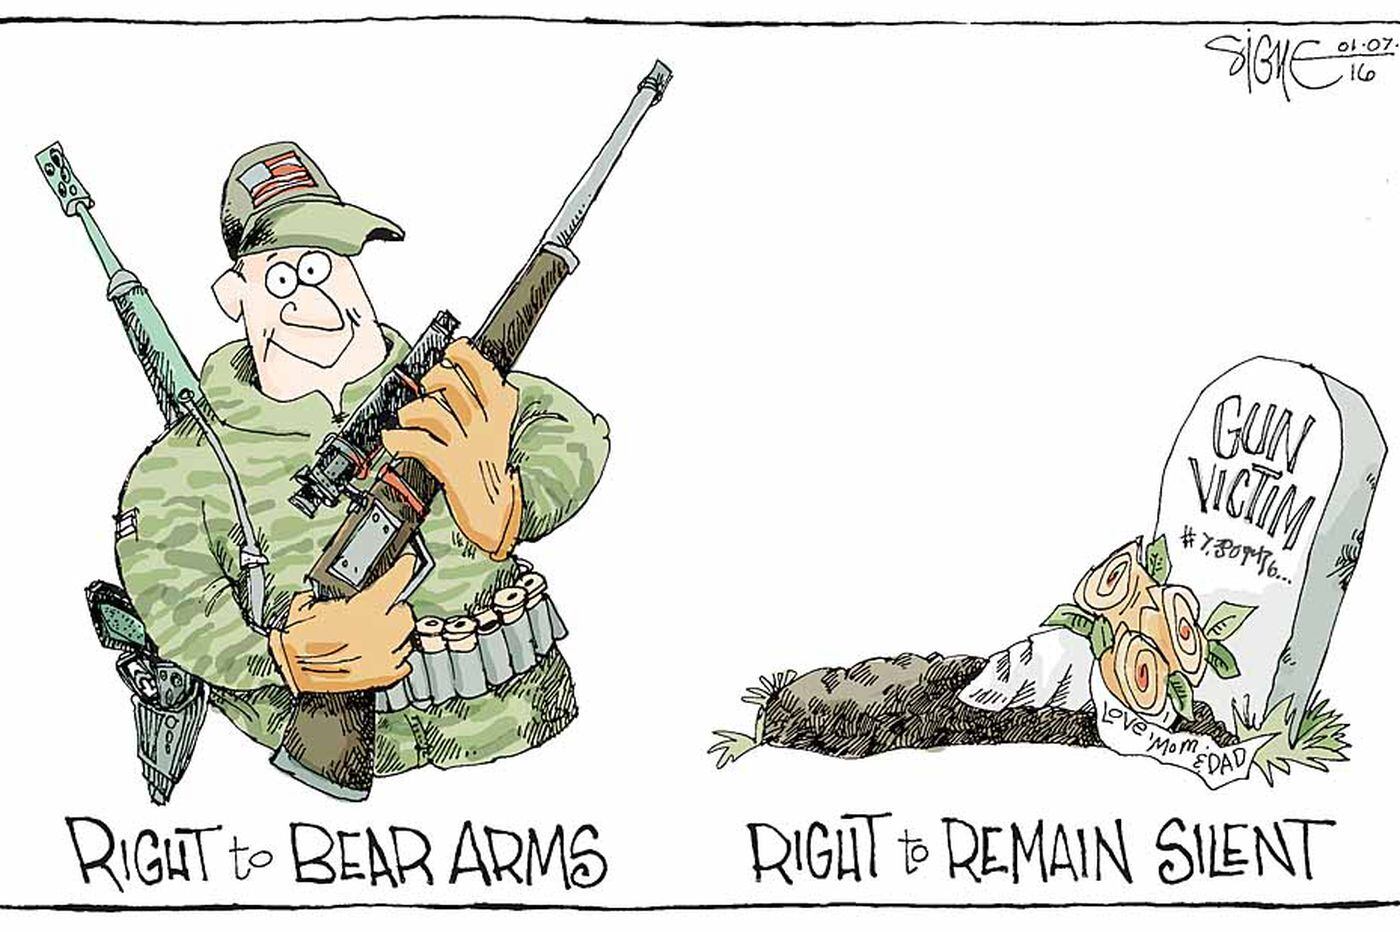 Right to bear arms cartoons and comics funny pictures from cartoonstock. 